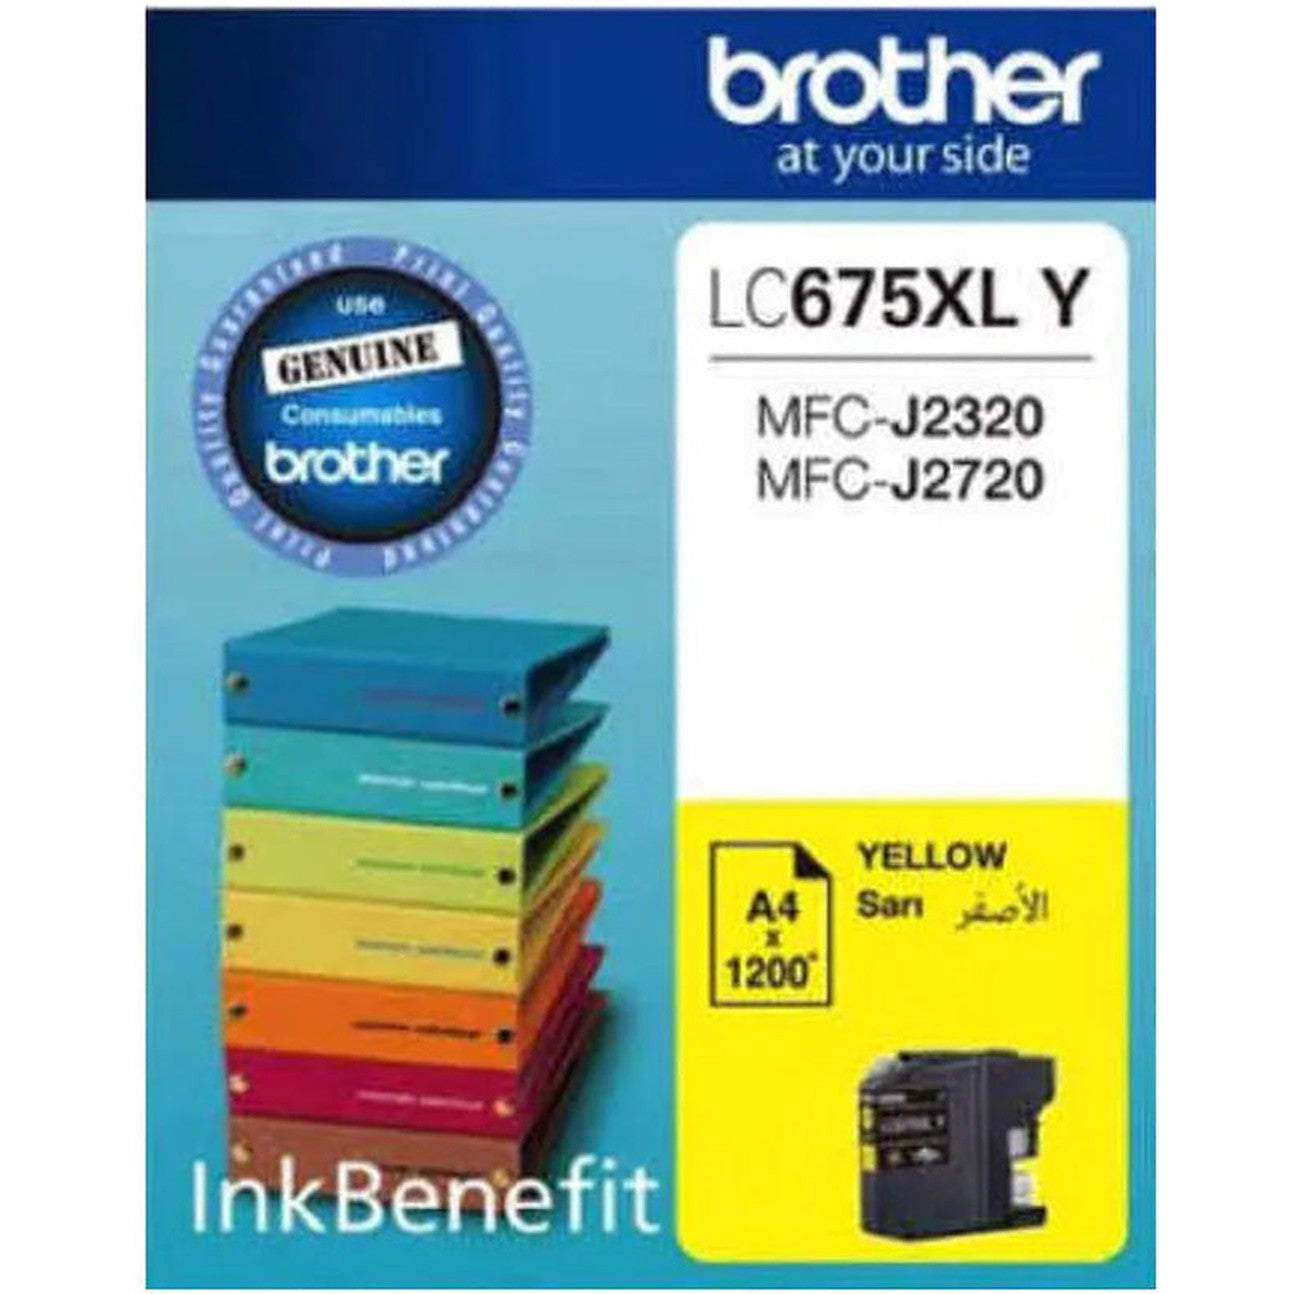 Brother Lc 675 Xl Yellow Ink Cartridge-Inks And Toners-Brother-Star Light Kuwait